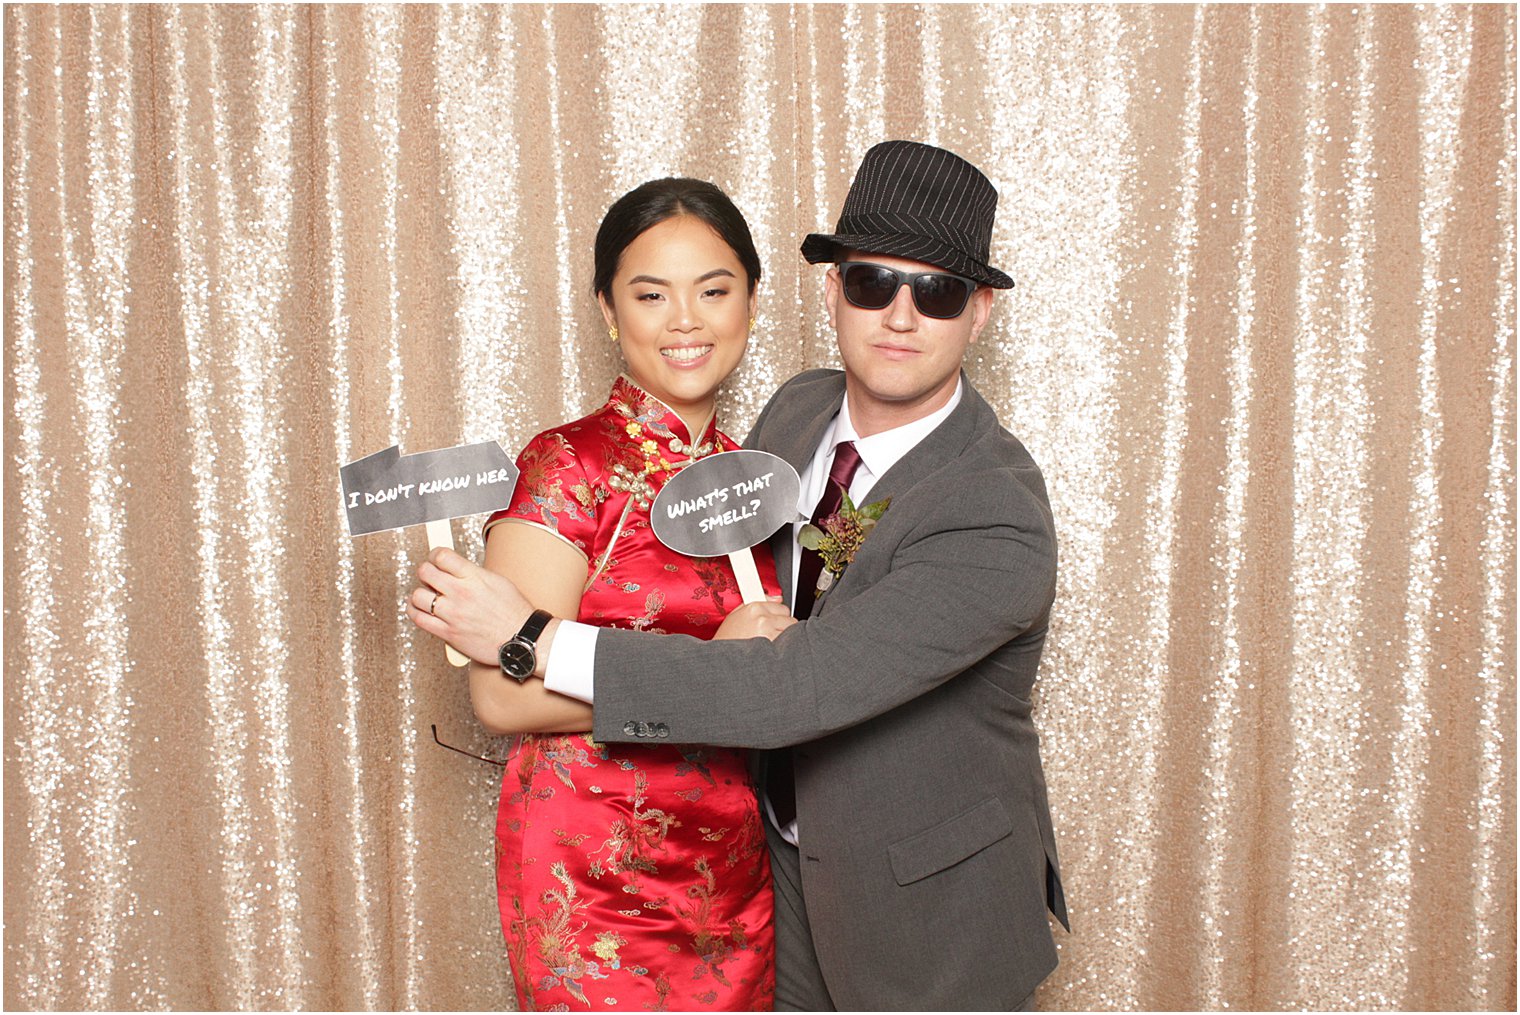 East Brunswick photo booth with bride and groom